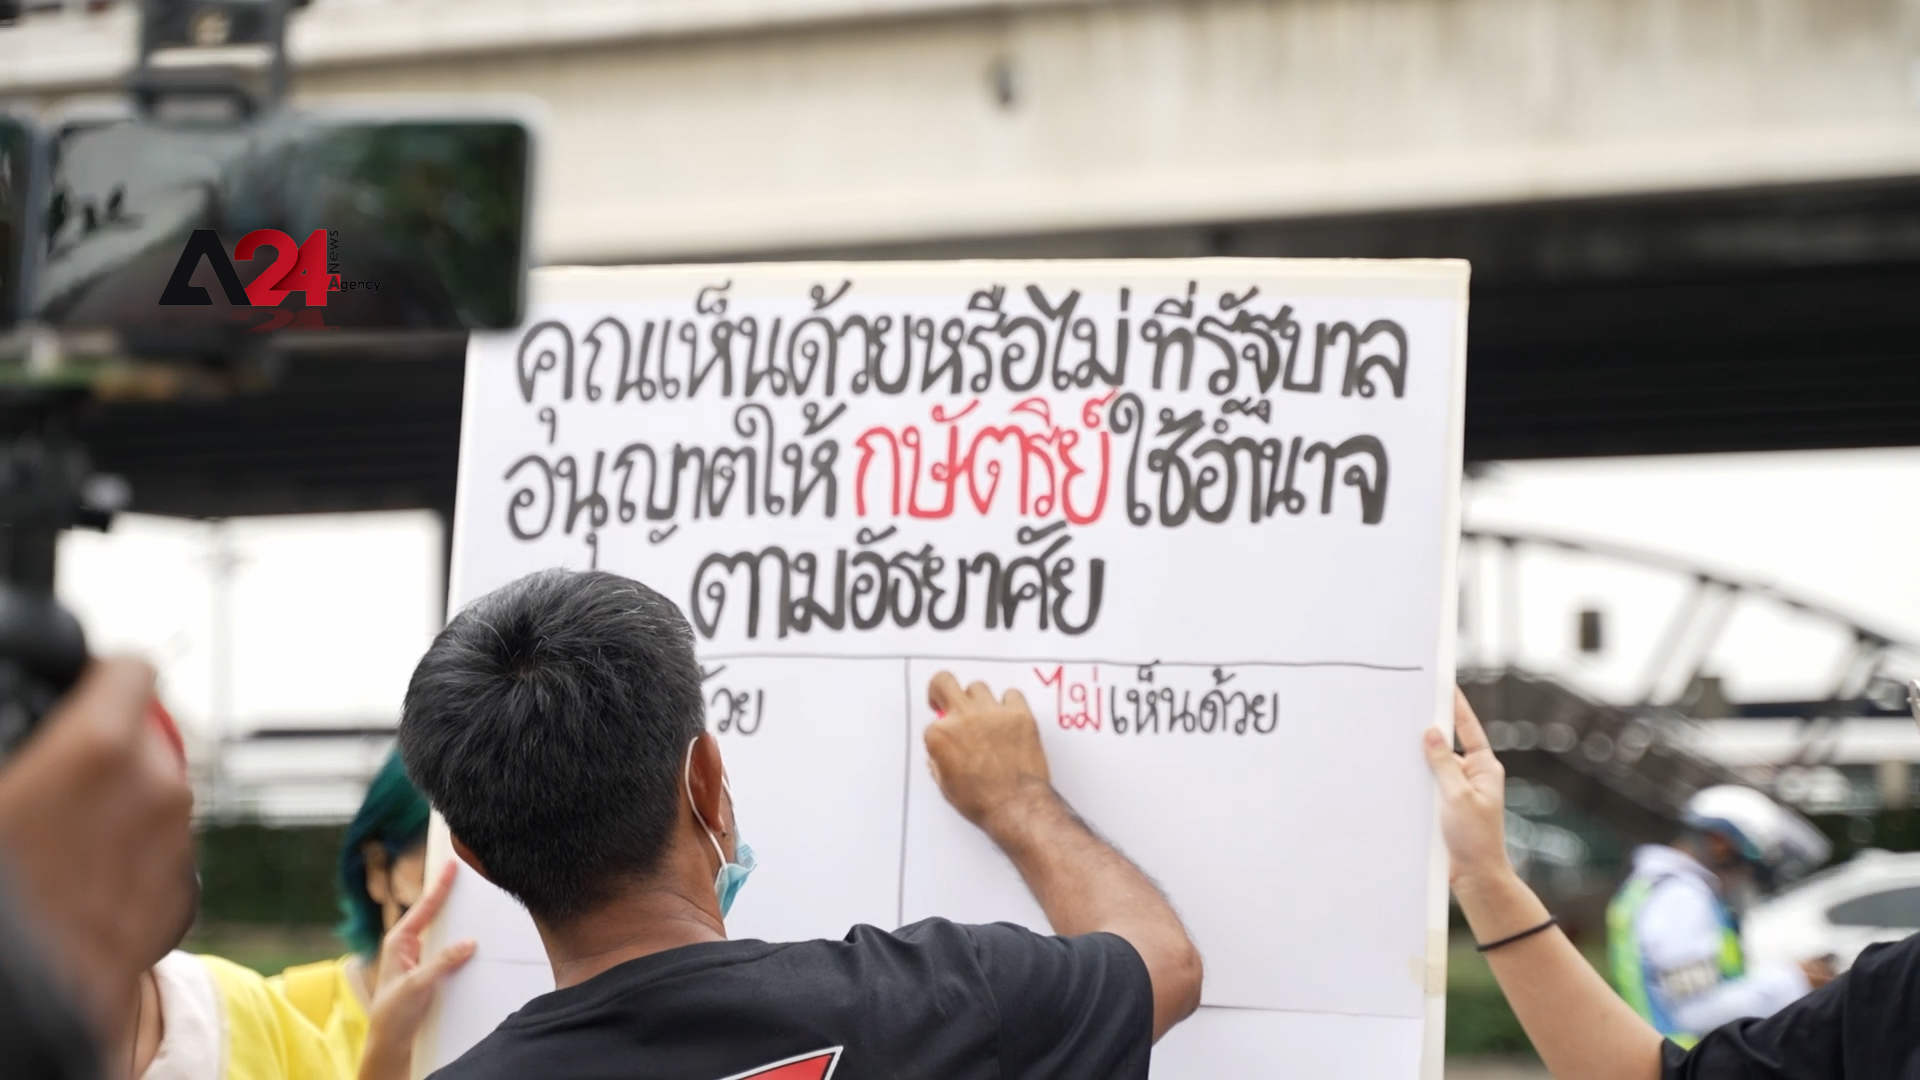 Thailand - Thai youth use online space to criticize government